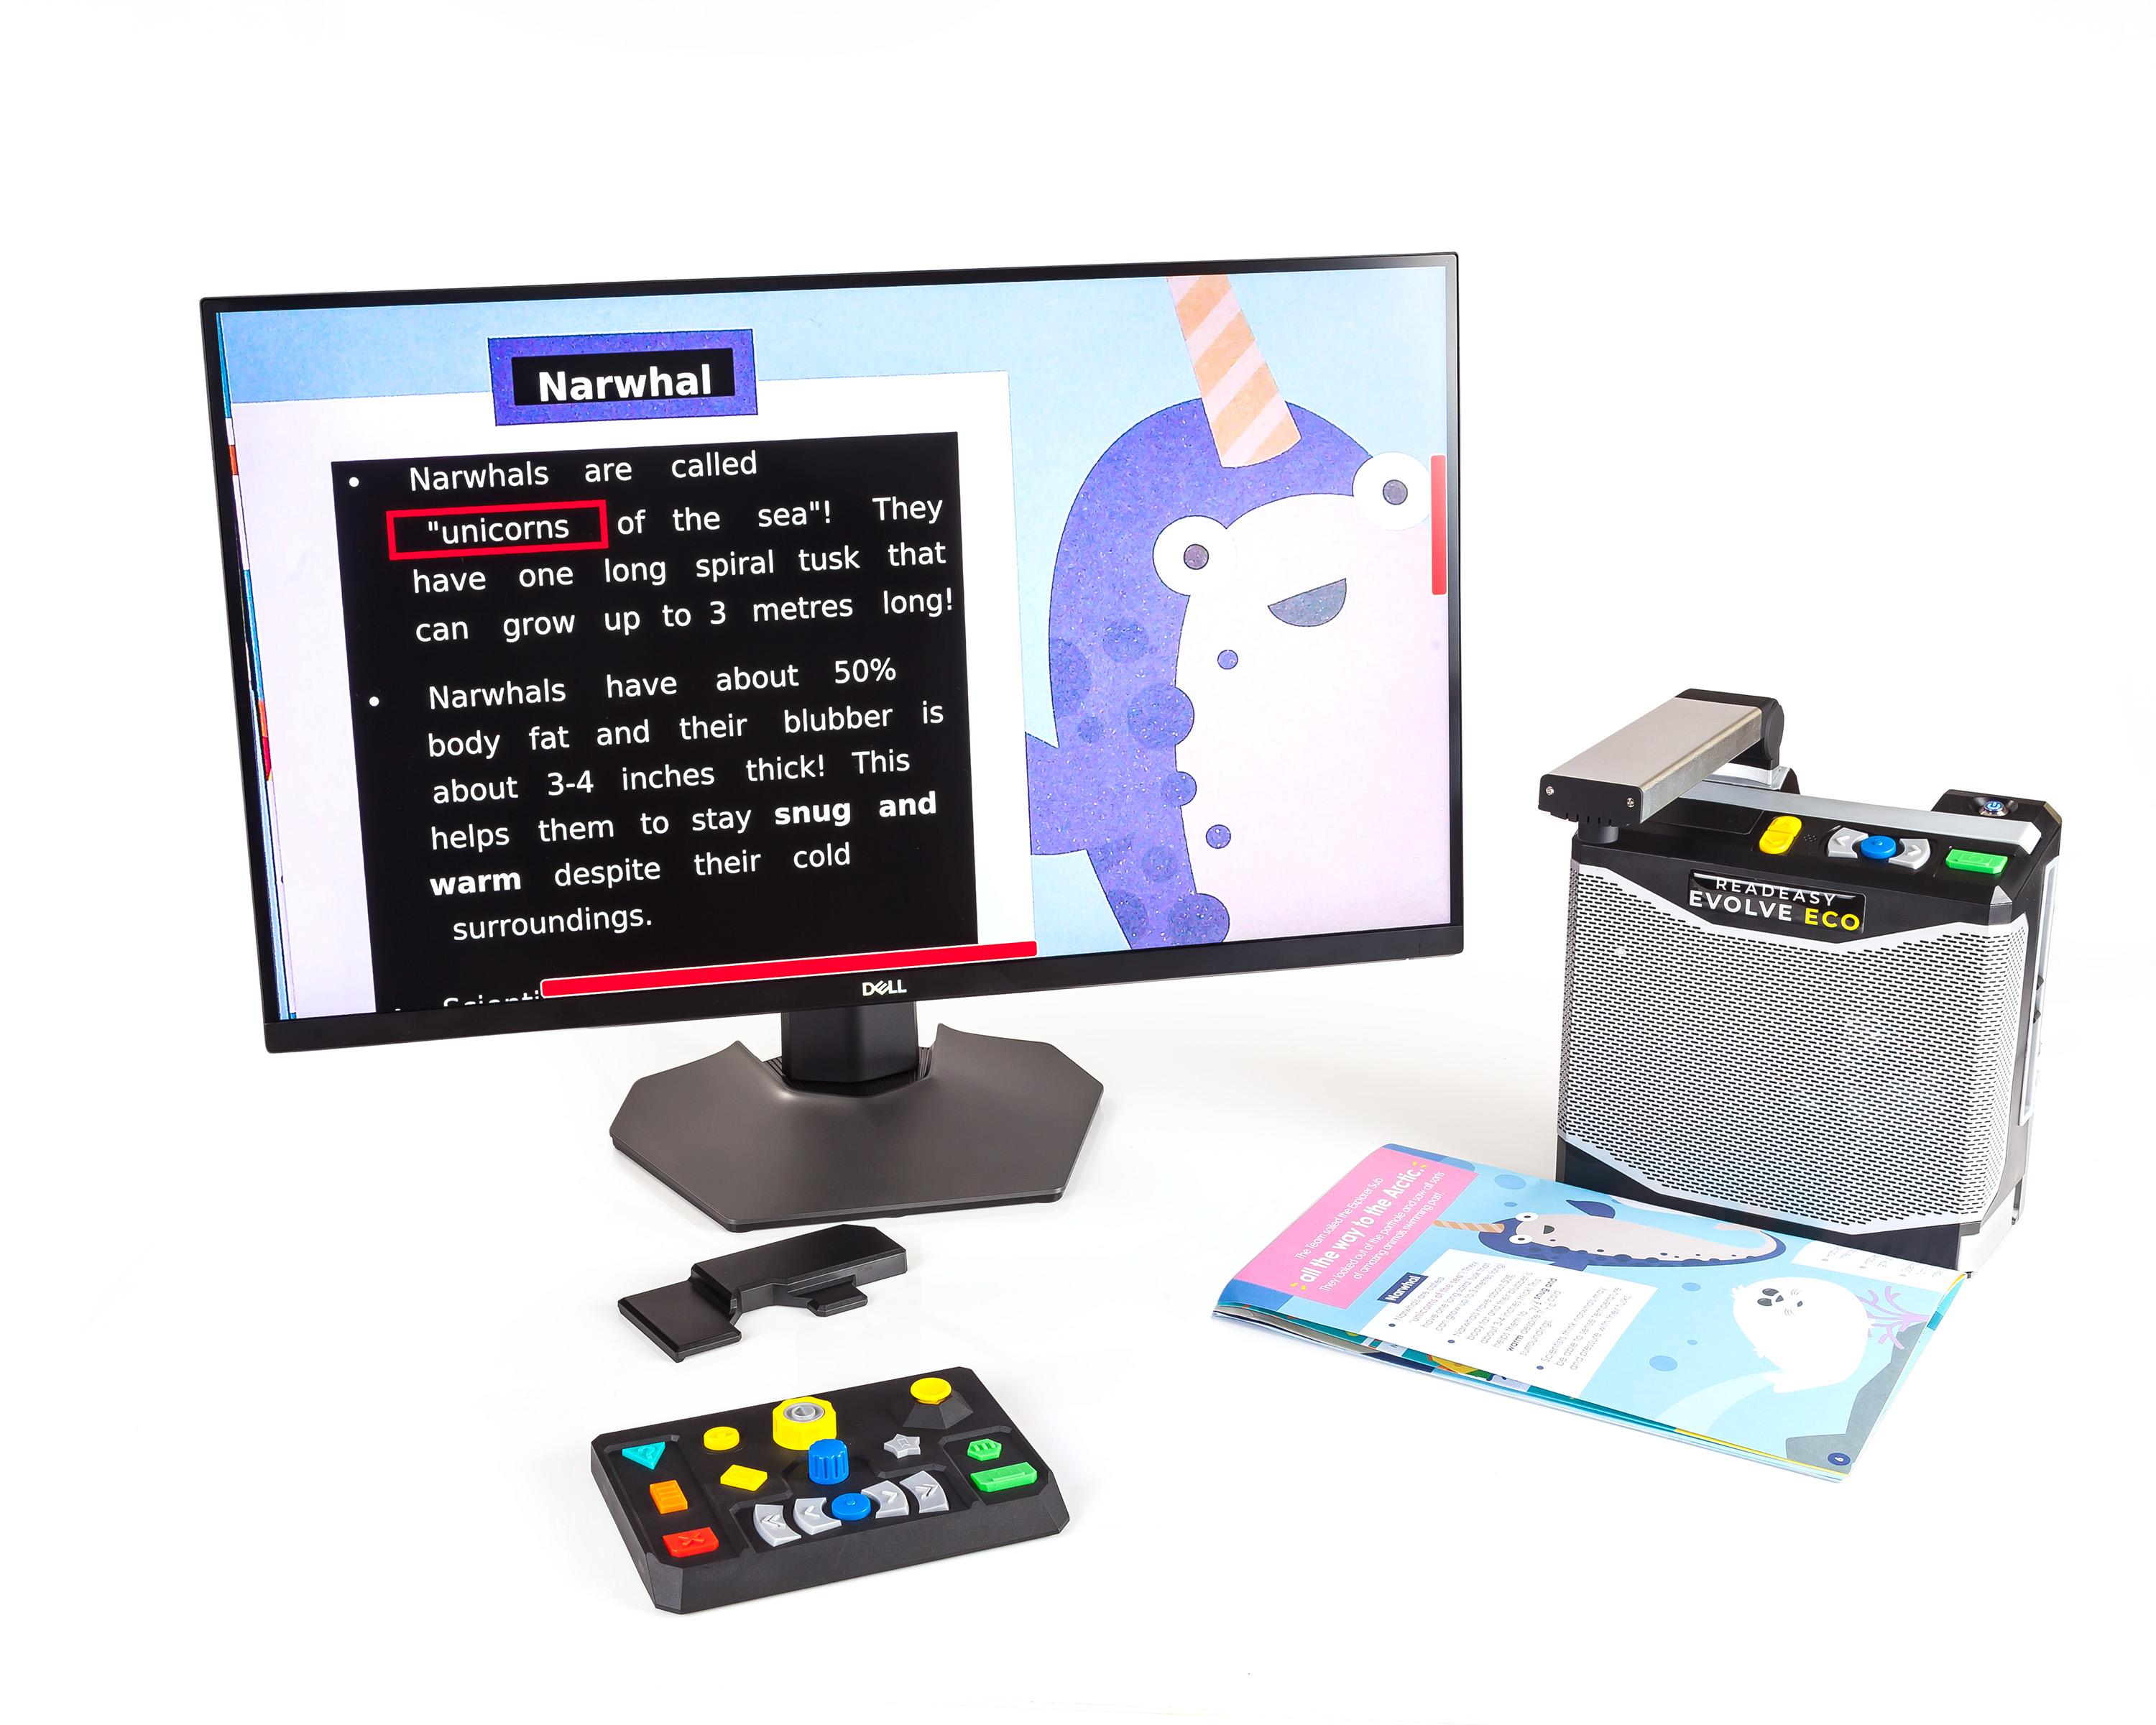 The Readeasy evolve eco connected to an external screen. The readeasy evolve eco is capturing a page from a childrens magazine, the captured page can be seen magnified on the screen. in front of the screen is the optional feature pack with it's guide cover removed